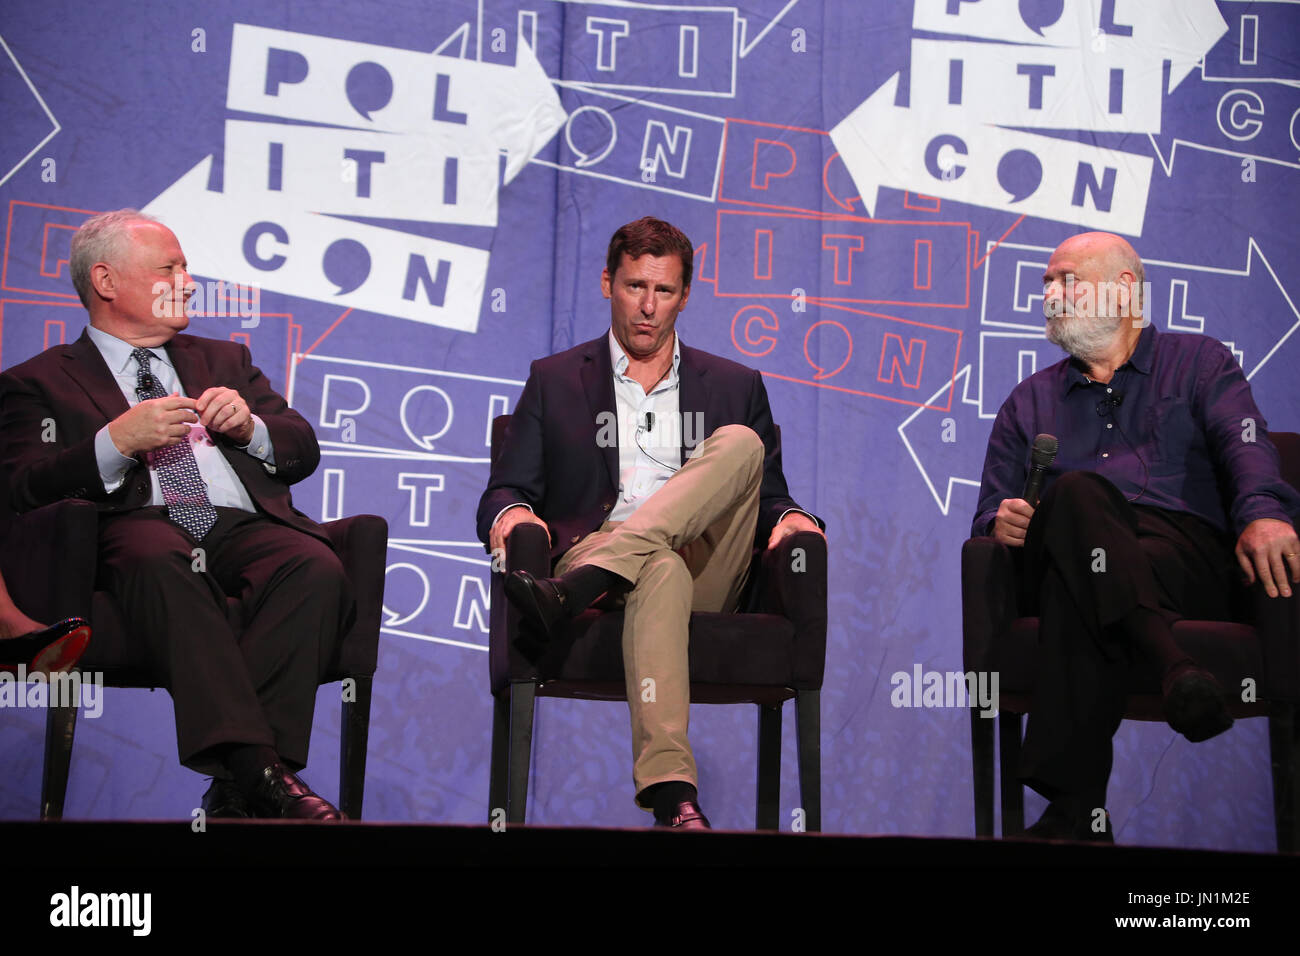 Pasadena, Ca. 29th July, 2017. Bill Kristol, Mark Updegrove and Rob Reiner pictured during the LBJ Panel Discussion at day 1 of Politicon The Unconventional Convention 2017 at The Pasadena Convention Center in Pasadena, California on July 29, 2017. Credit: Faye Sadou/Media Punch/Alamy Live News Stock Photo